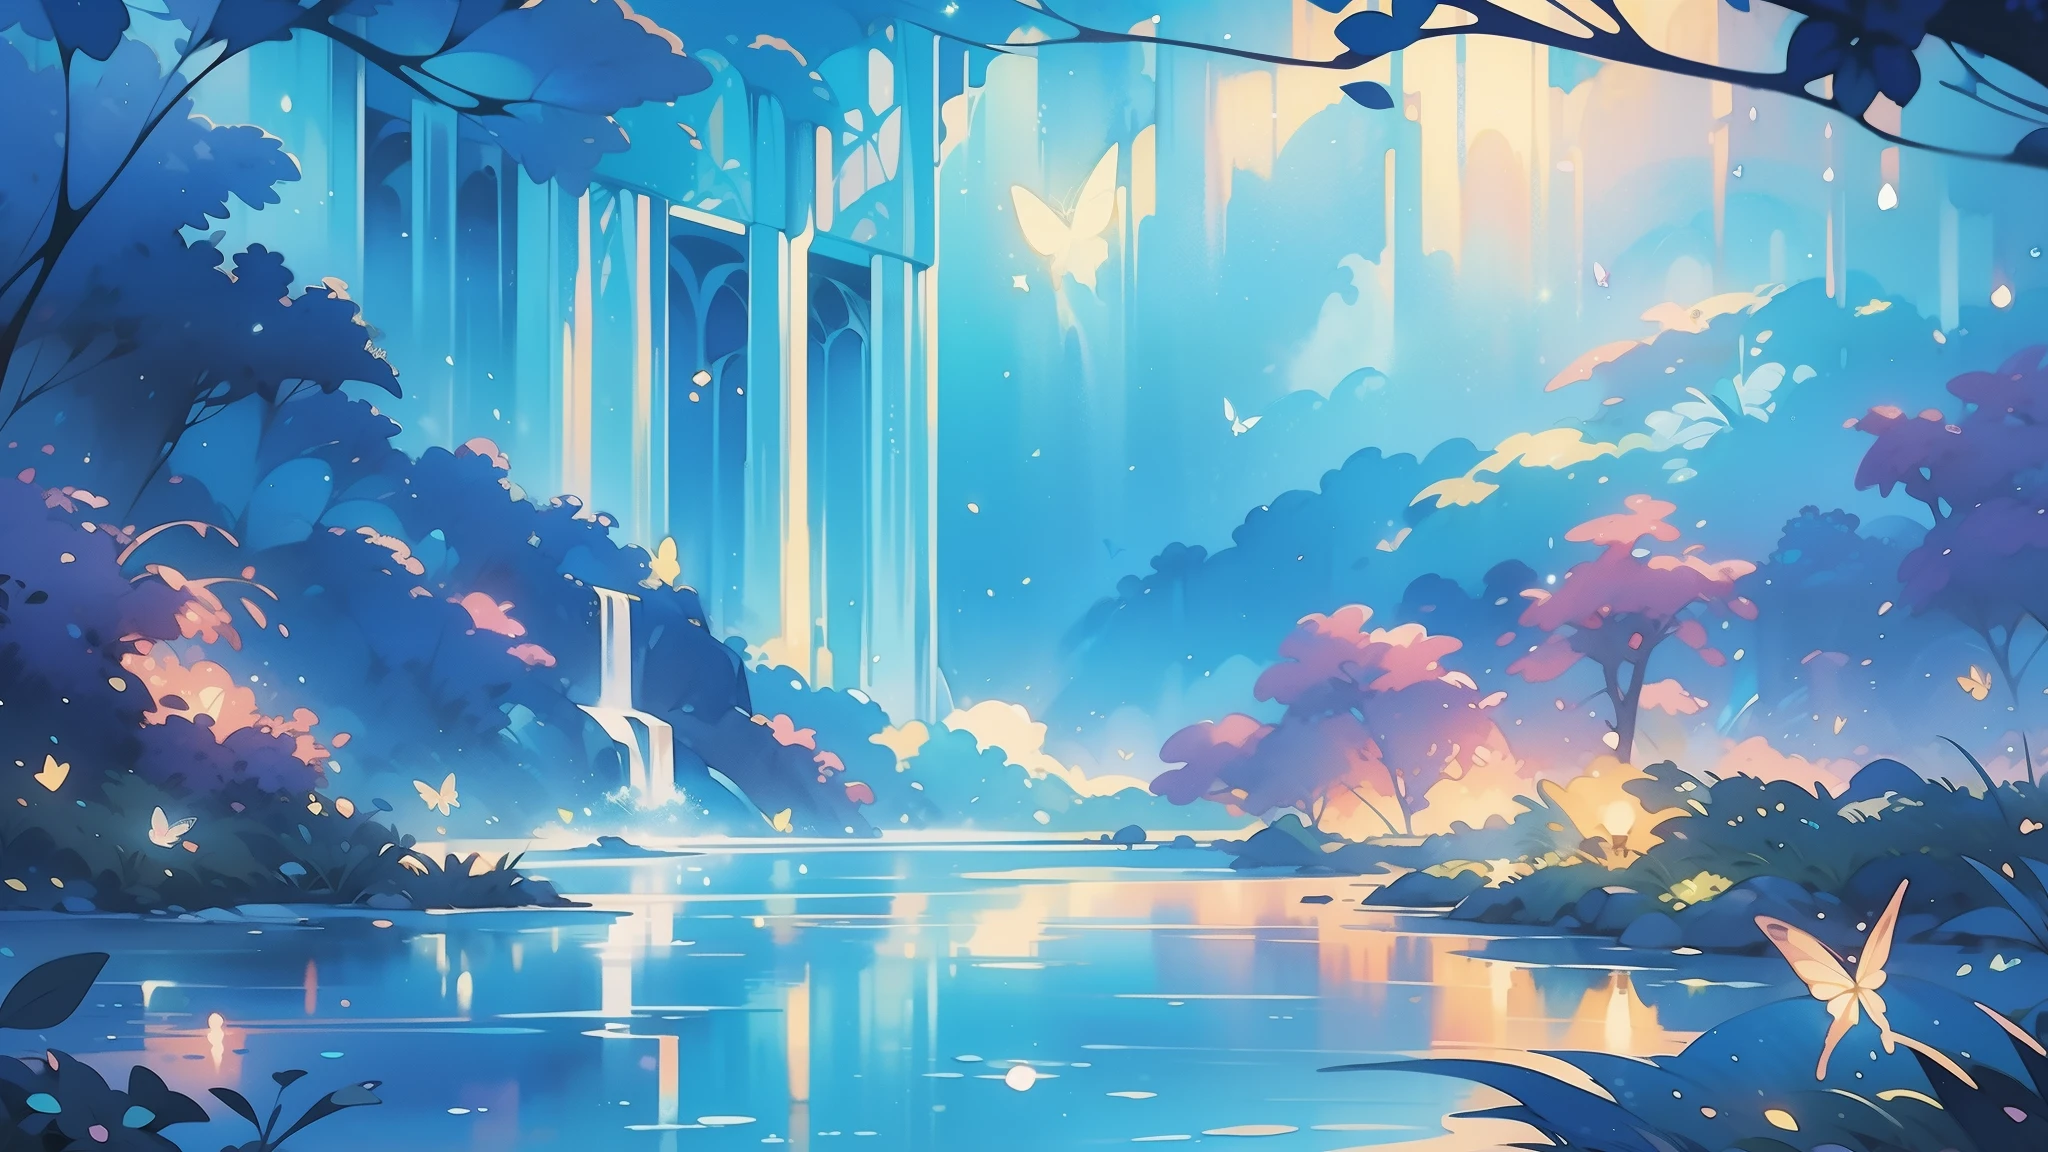 illustration, watercolor illustration, vibrant pastel colors, dreamy, colorful, whimsical, magical, masterpiece, best quality, sharp focus, intricately detailed environment, fine detail, 8k resolution, waterfall lagoon, (magical lagoon), (waterfall, lake), (glowing lights, fireflies, glowing butterflies